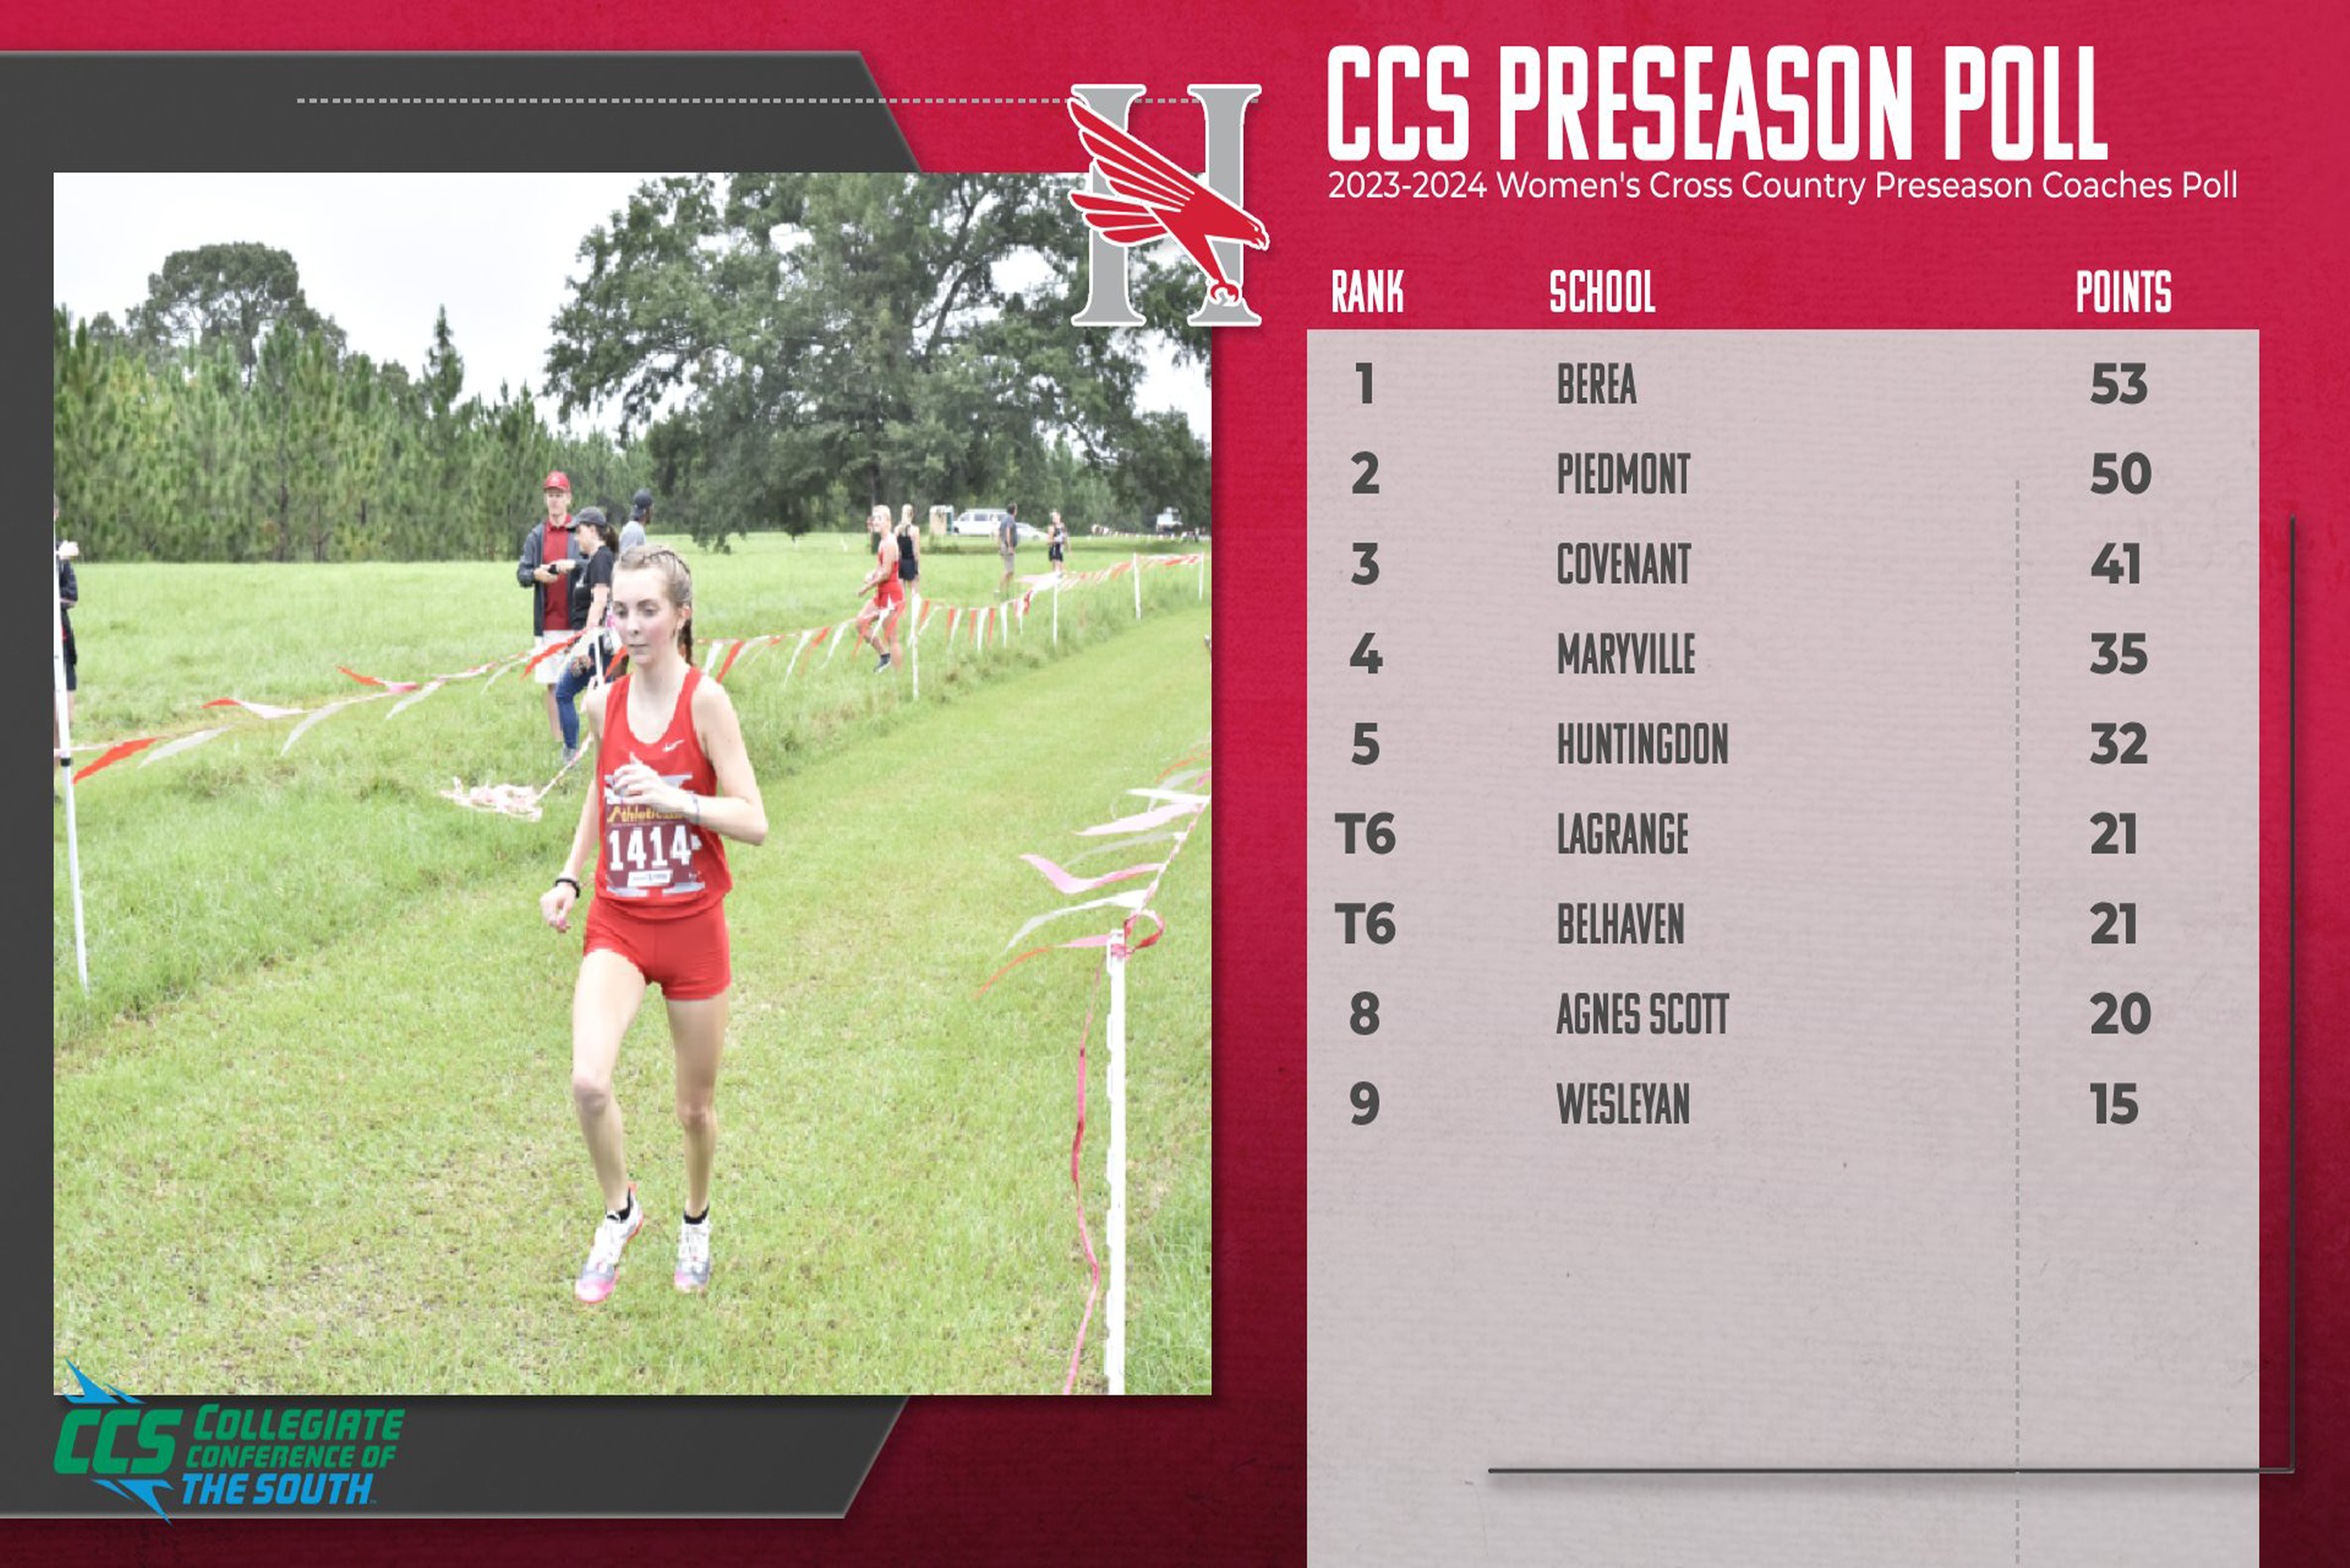 Women’s Cross Country Picked to Finish 5th in CCS